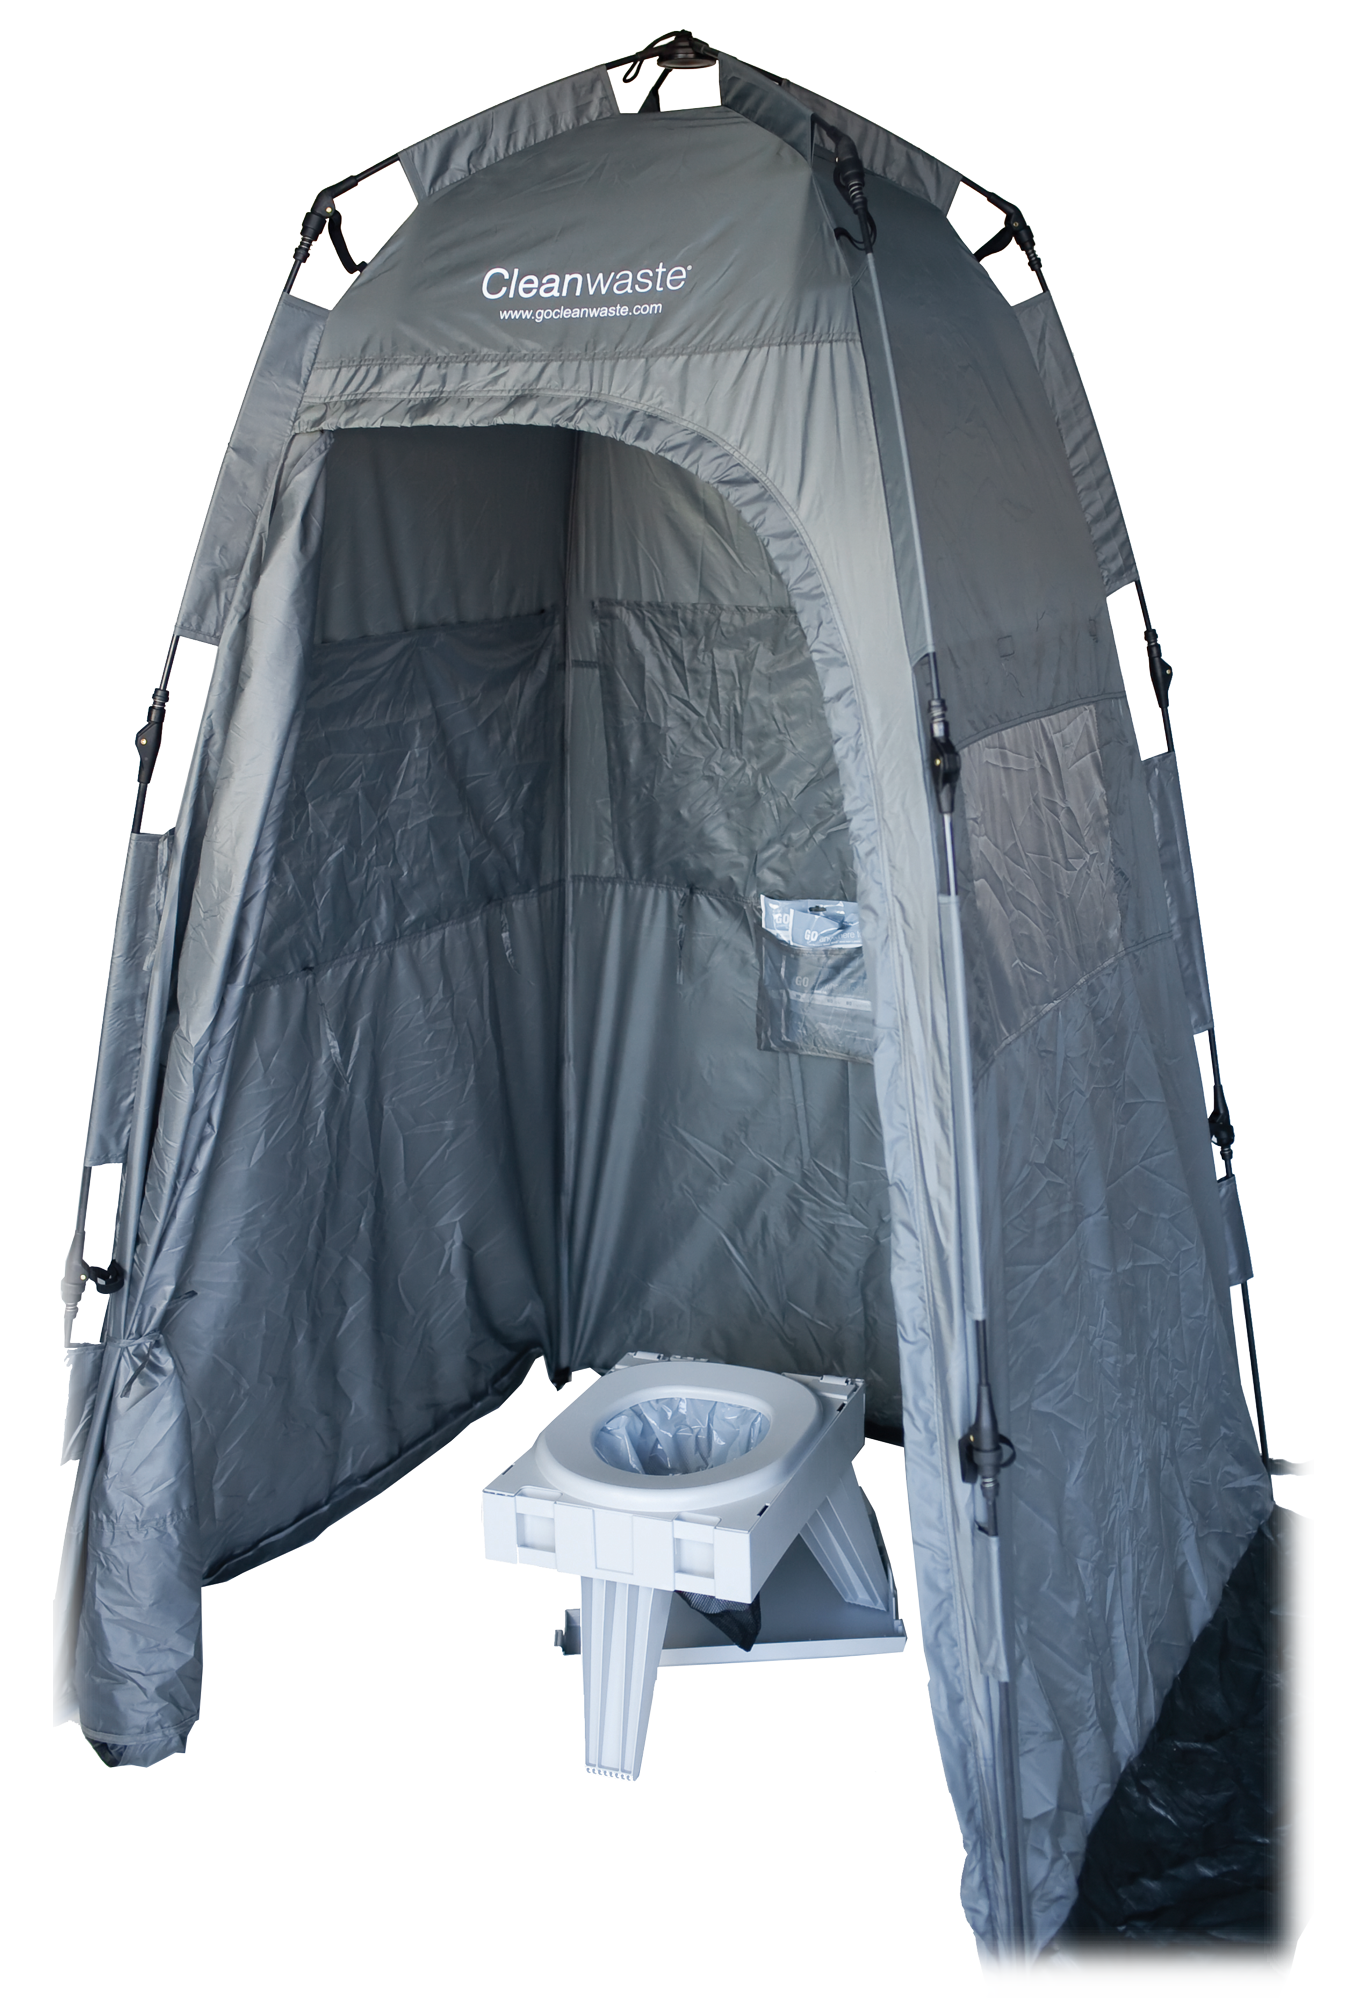 The PUP Portable Utility Pop-Up Tent